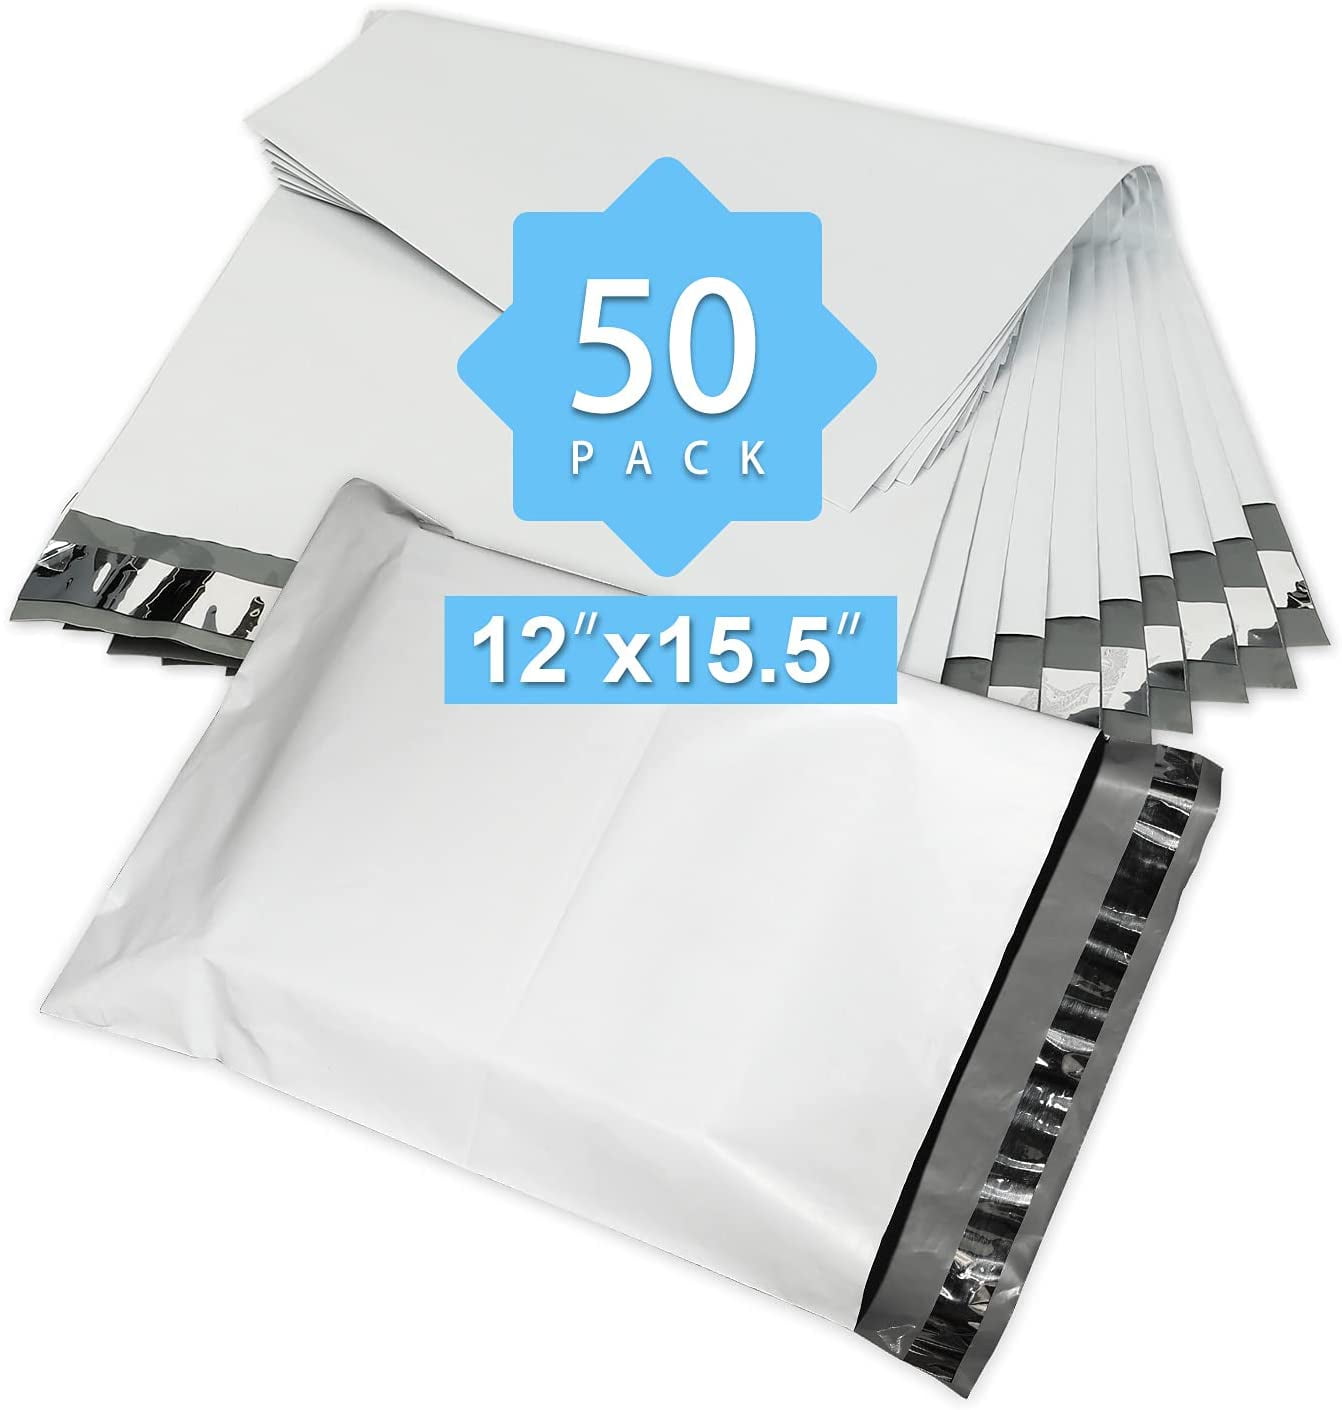 Secure Seal by Shipping Depot 25 Pack of 5x7 White Poly Mailers Self Sealing Envelope Plastic Bags 5”x7” #0 